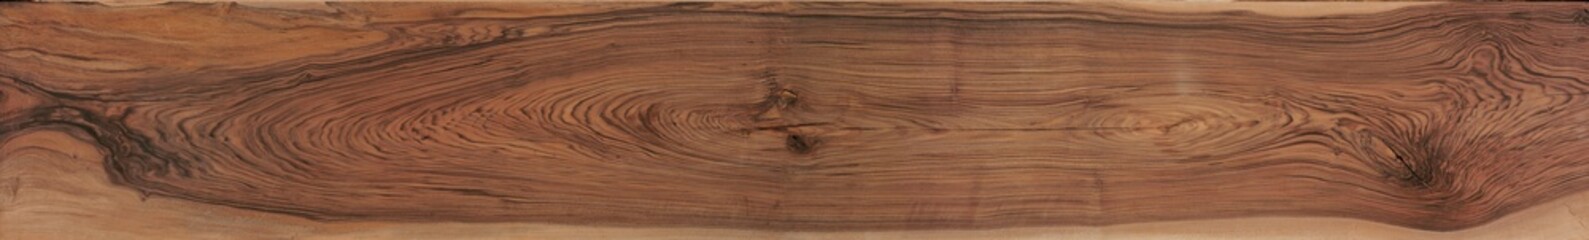 close up of a wooden plank